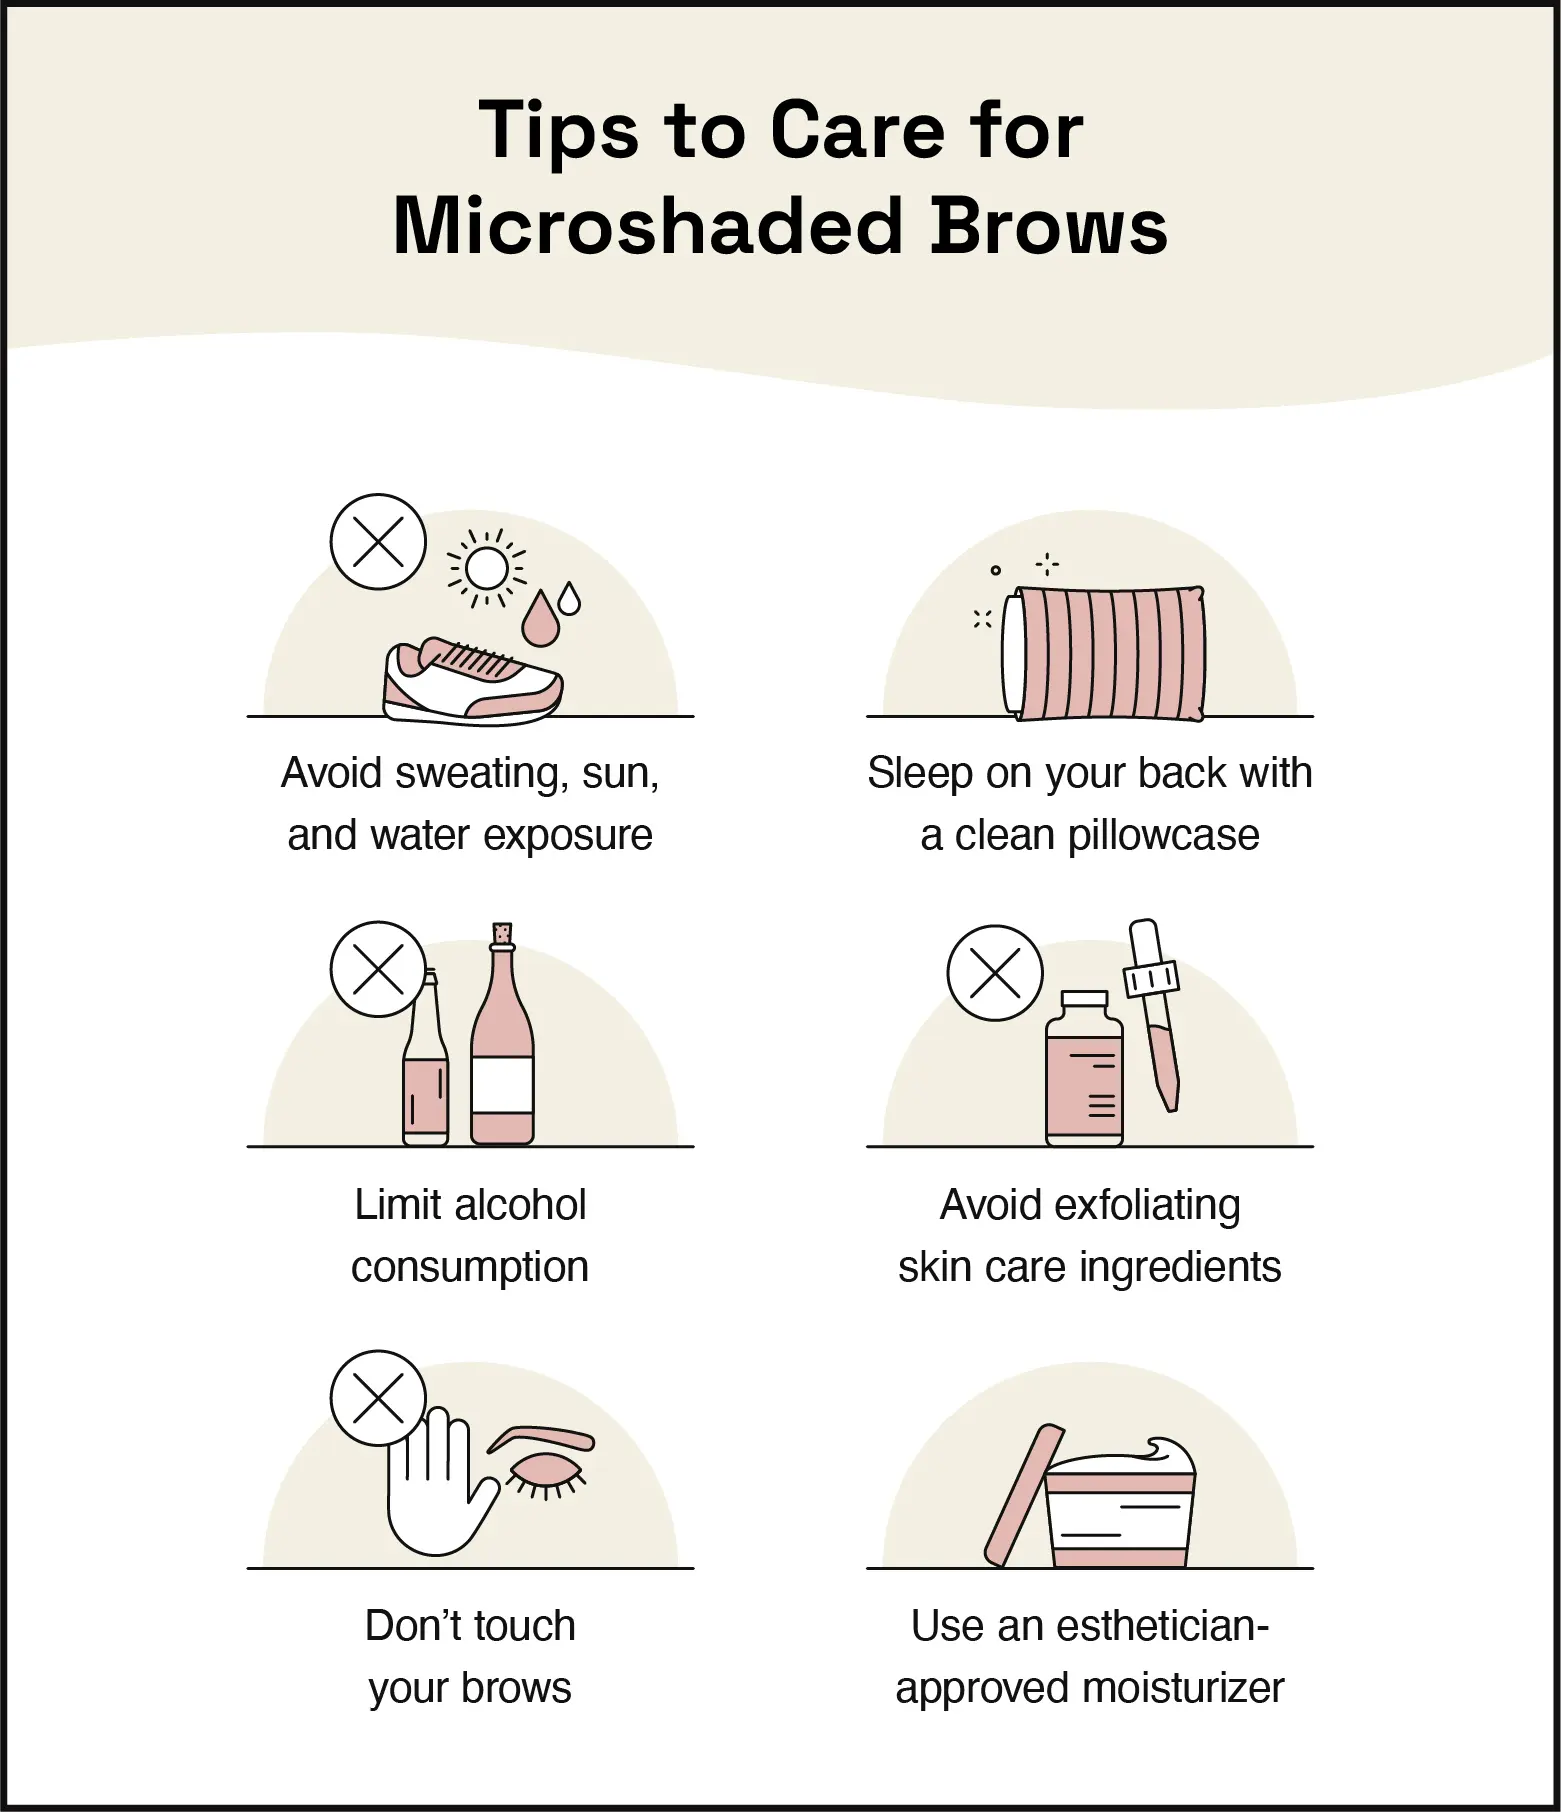 To take care of your brows, avoid sweating, sun, and water exposure; sleep on your back with a clean pillowcase; limit alcohol consumption; avoid exfoliating skincare ingredients; and keep your hands off your brows.